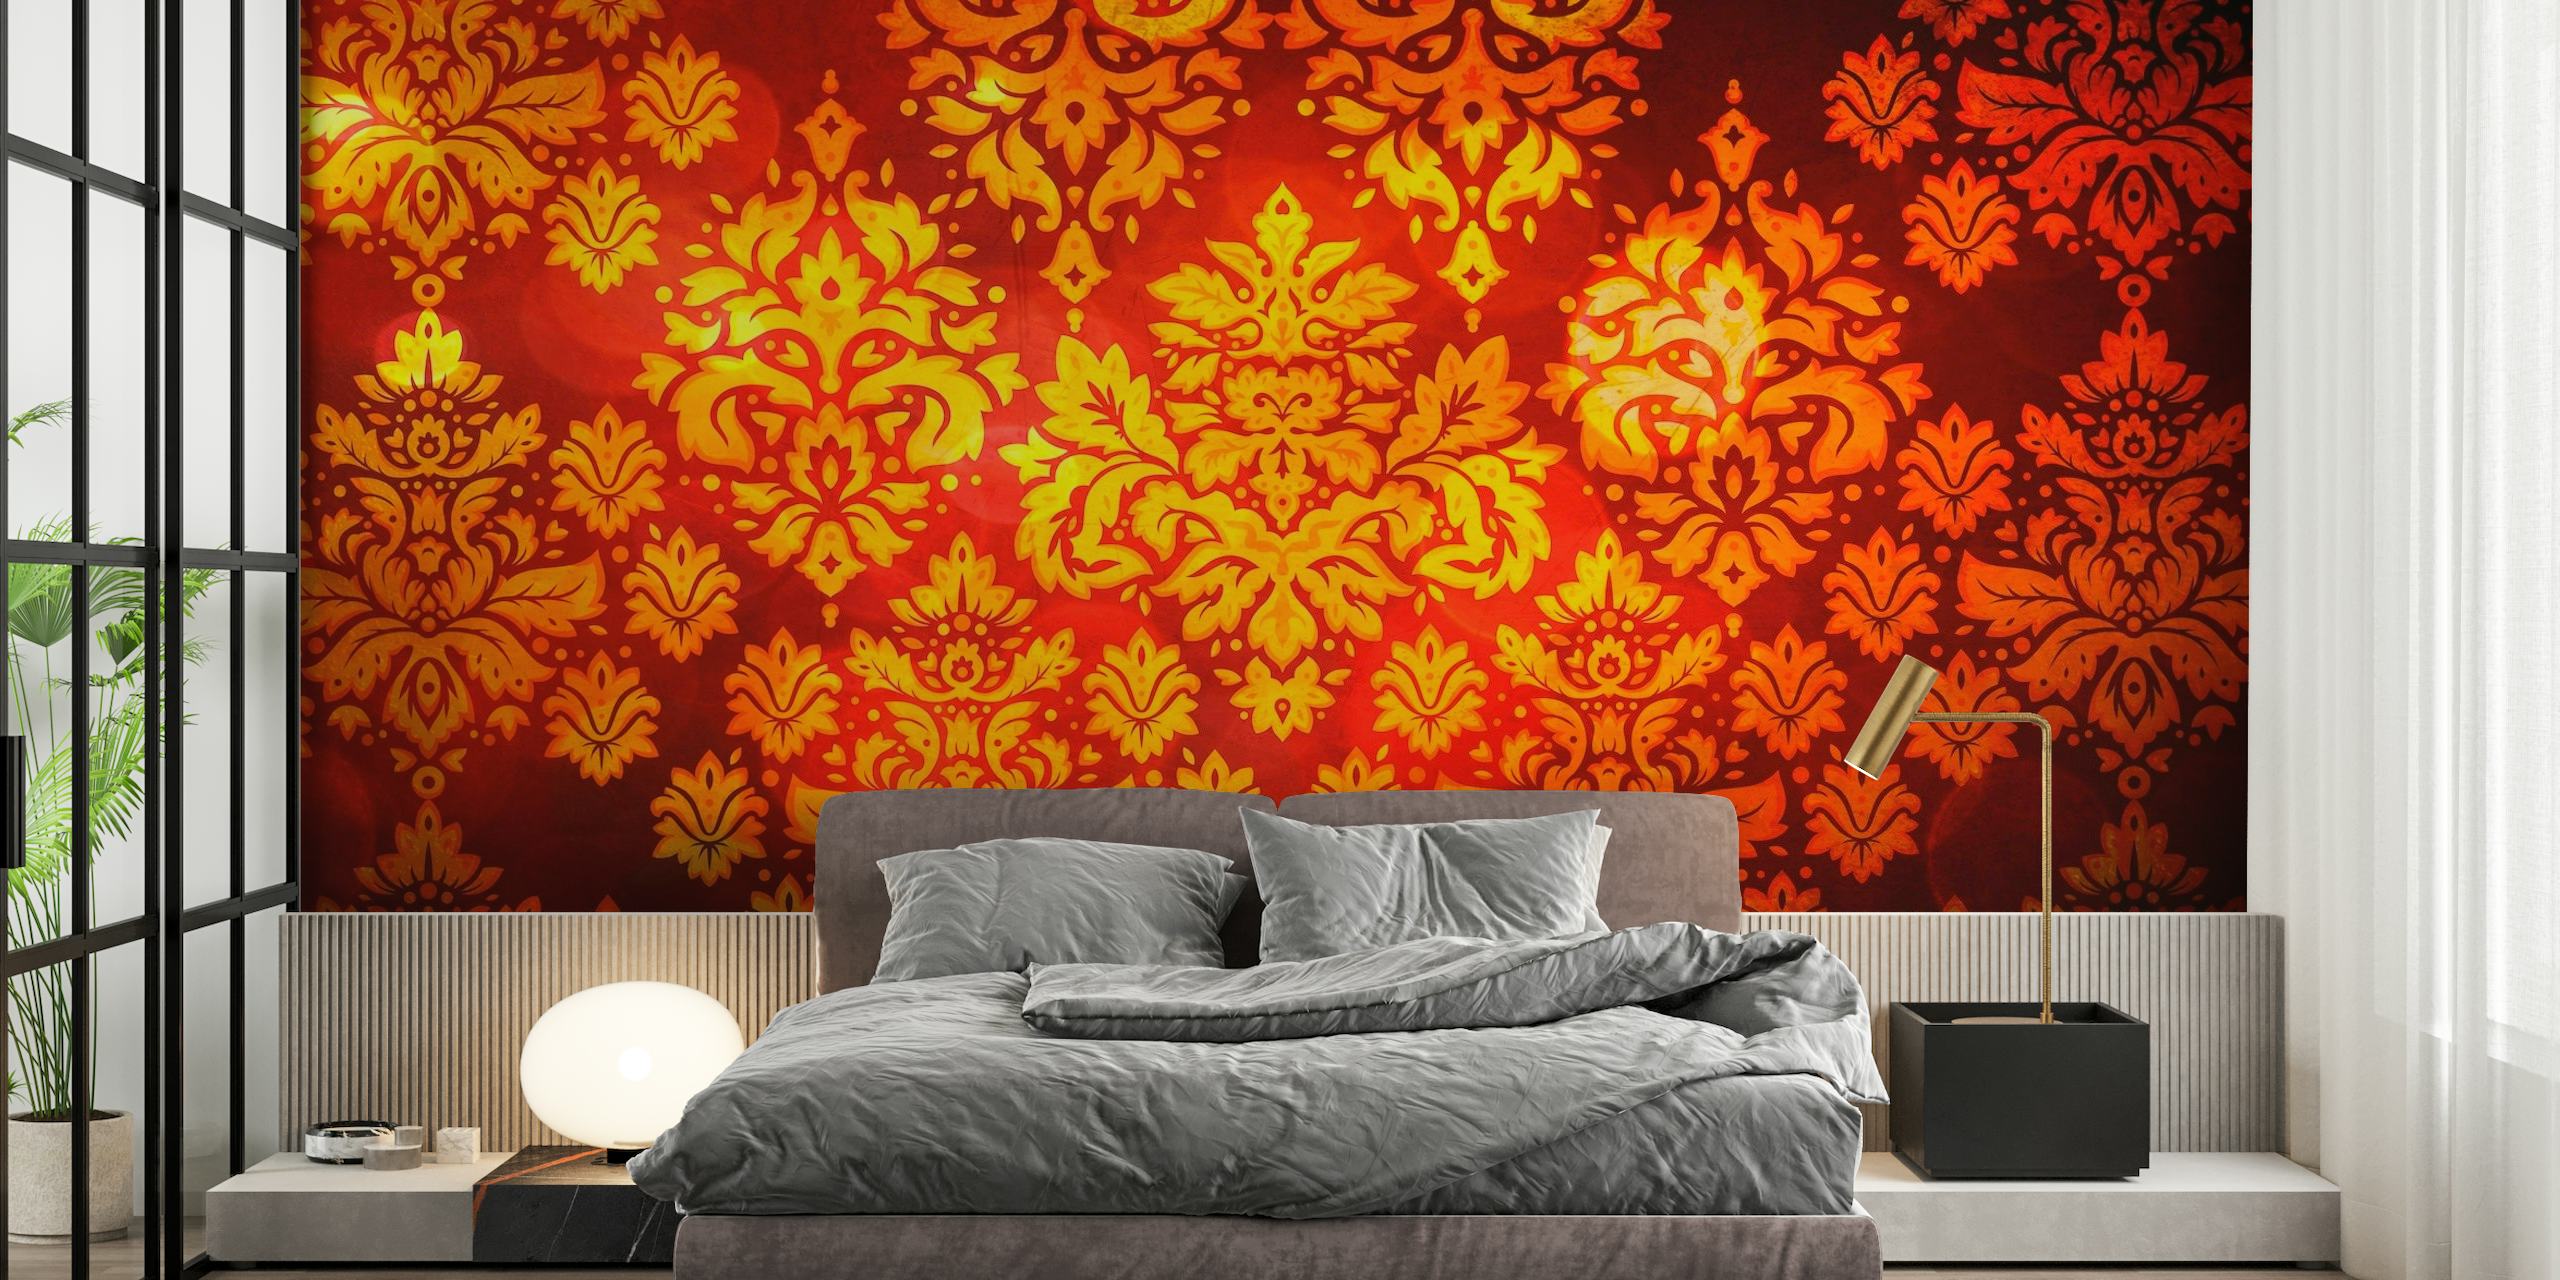 Elegant red and gold damask pattern wall mural for a luxurious interior decor